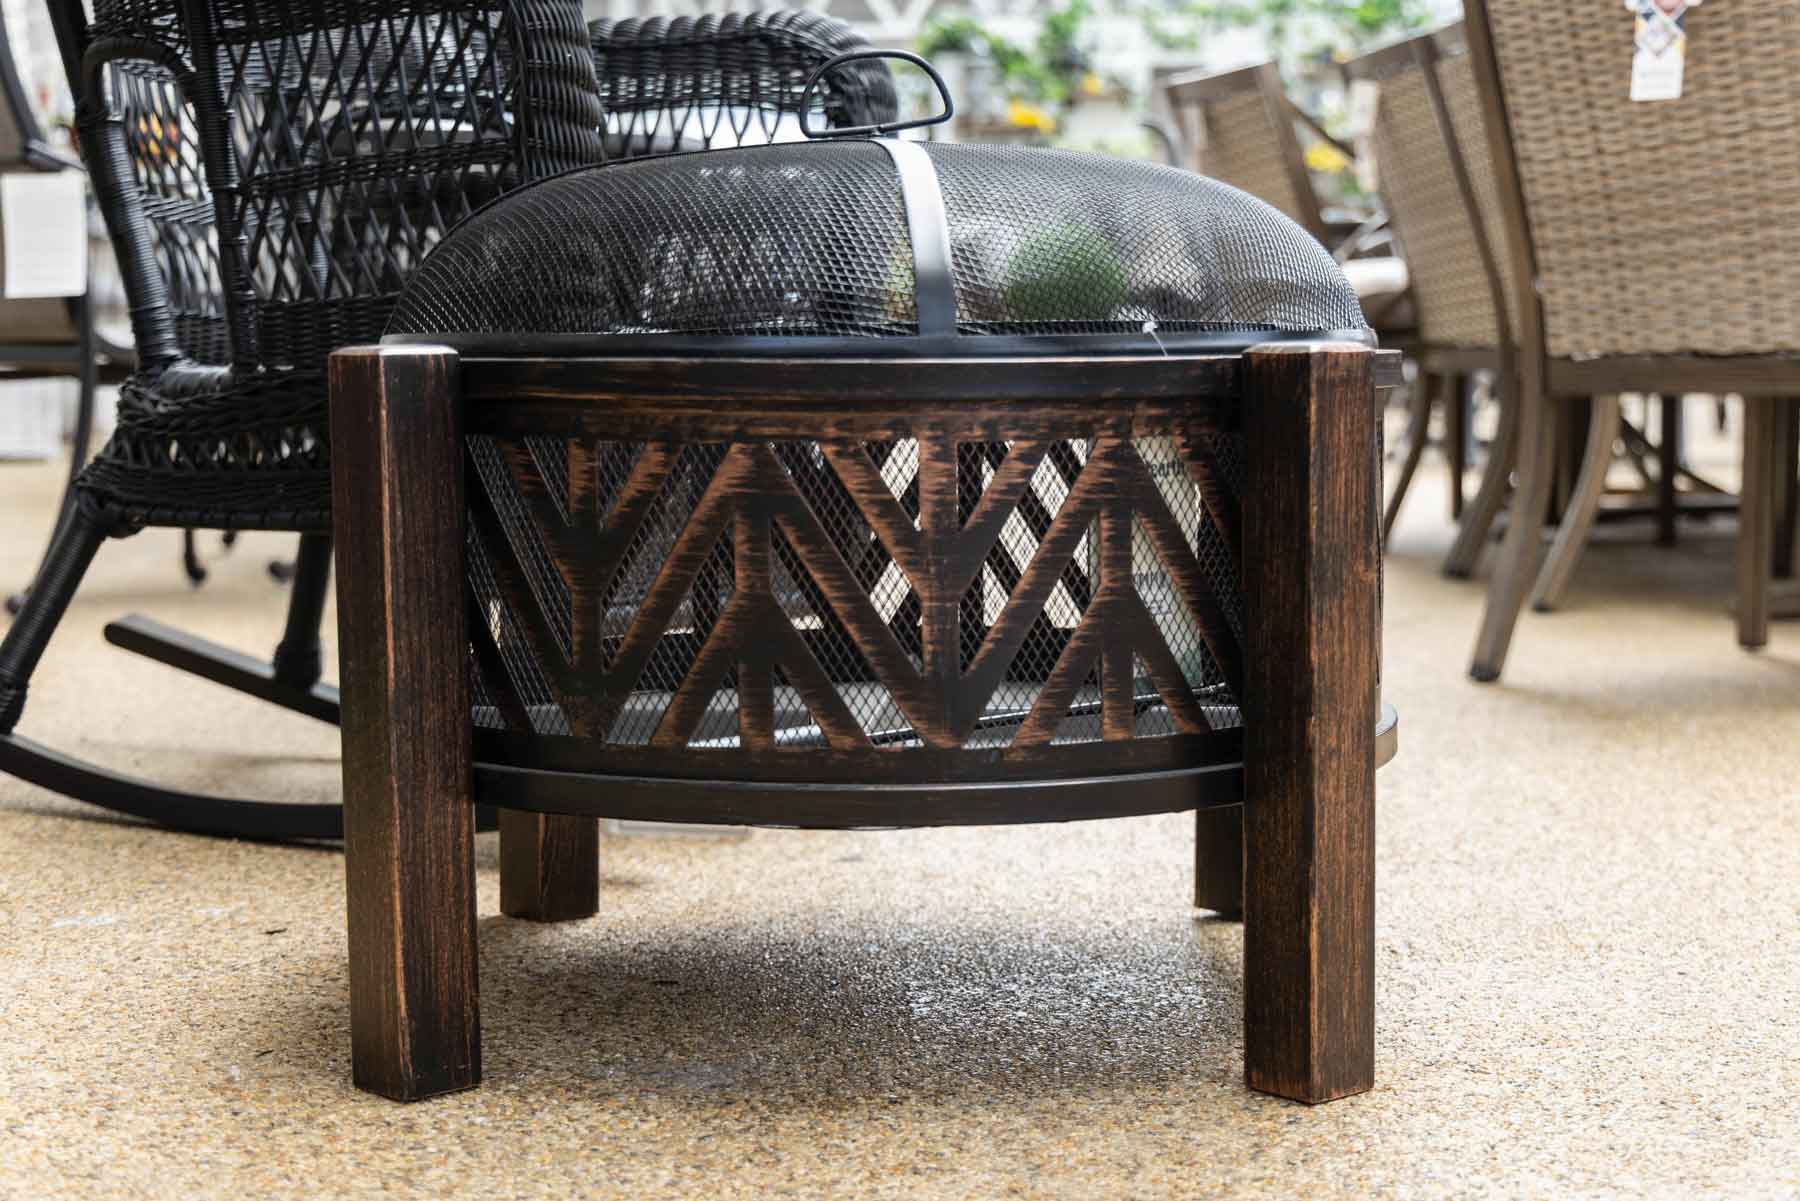 Wood Burning Fire Pit 28-in 'Mason'